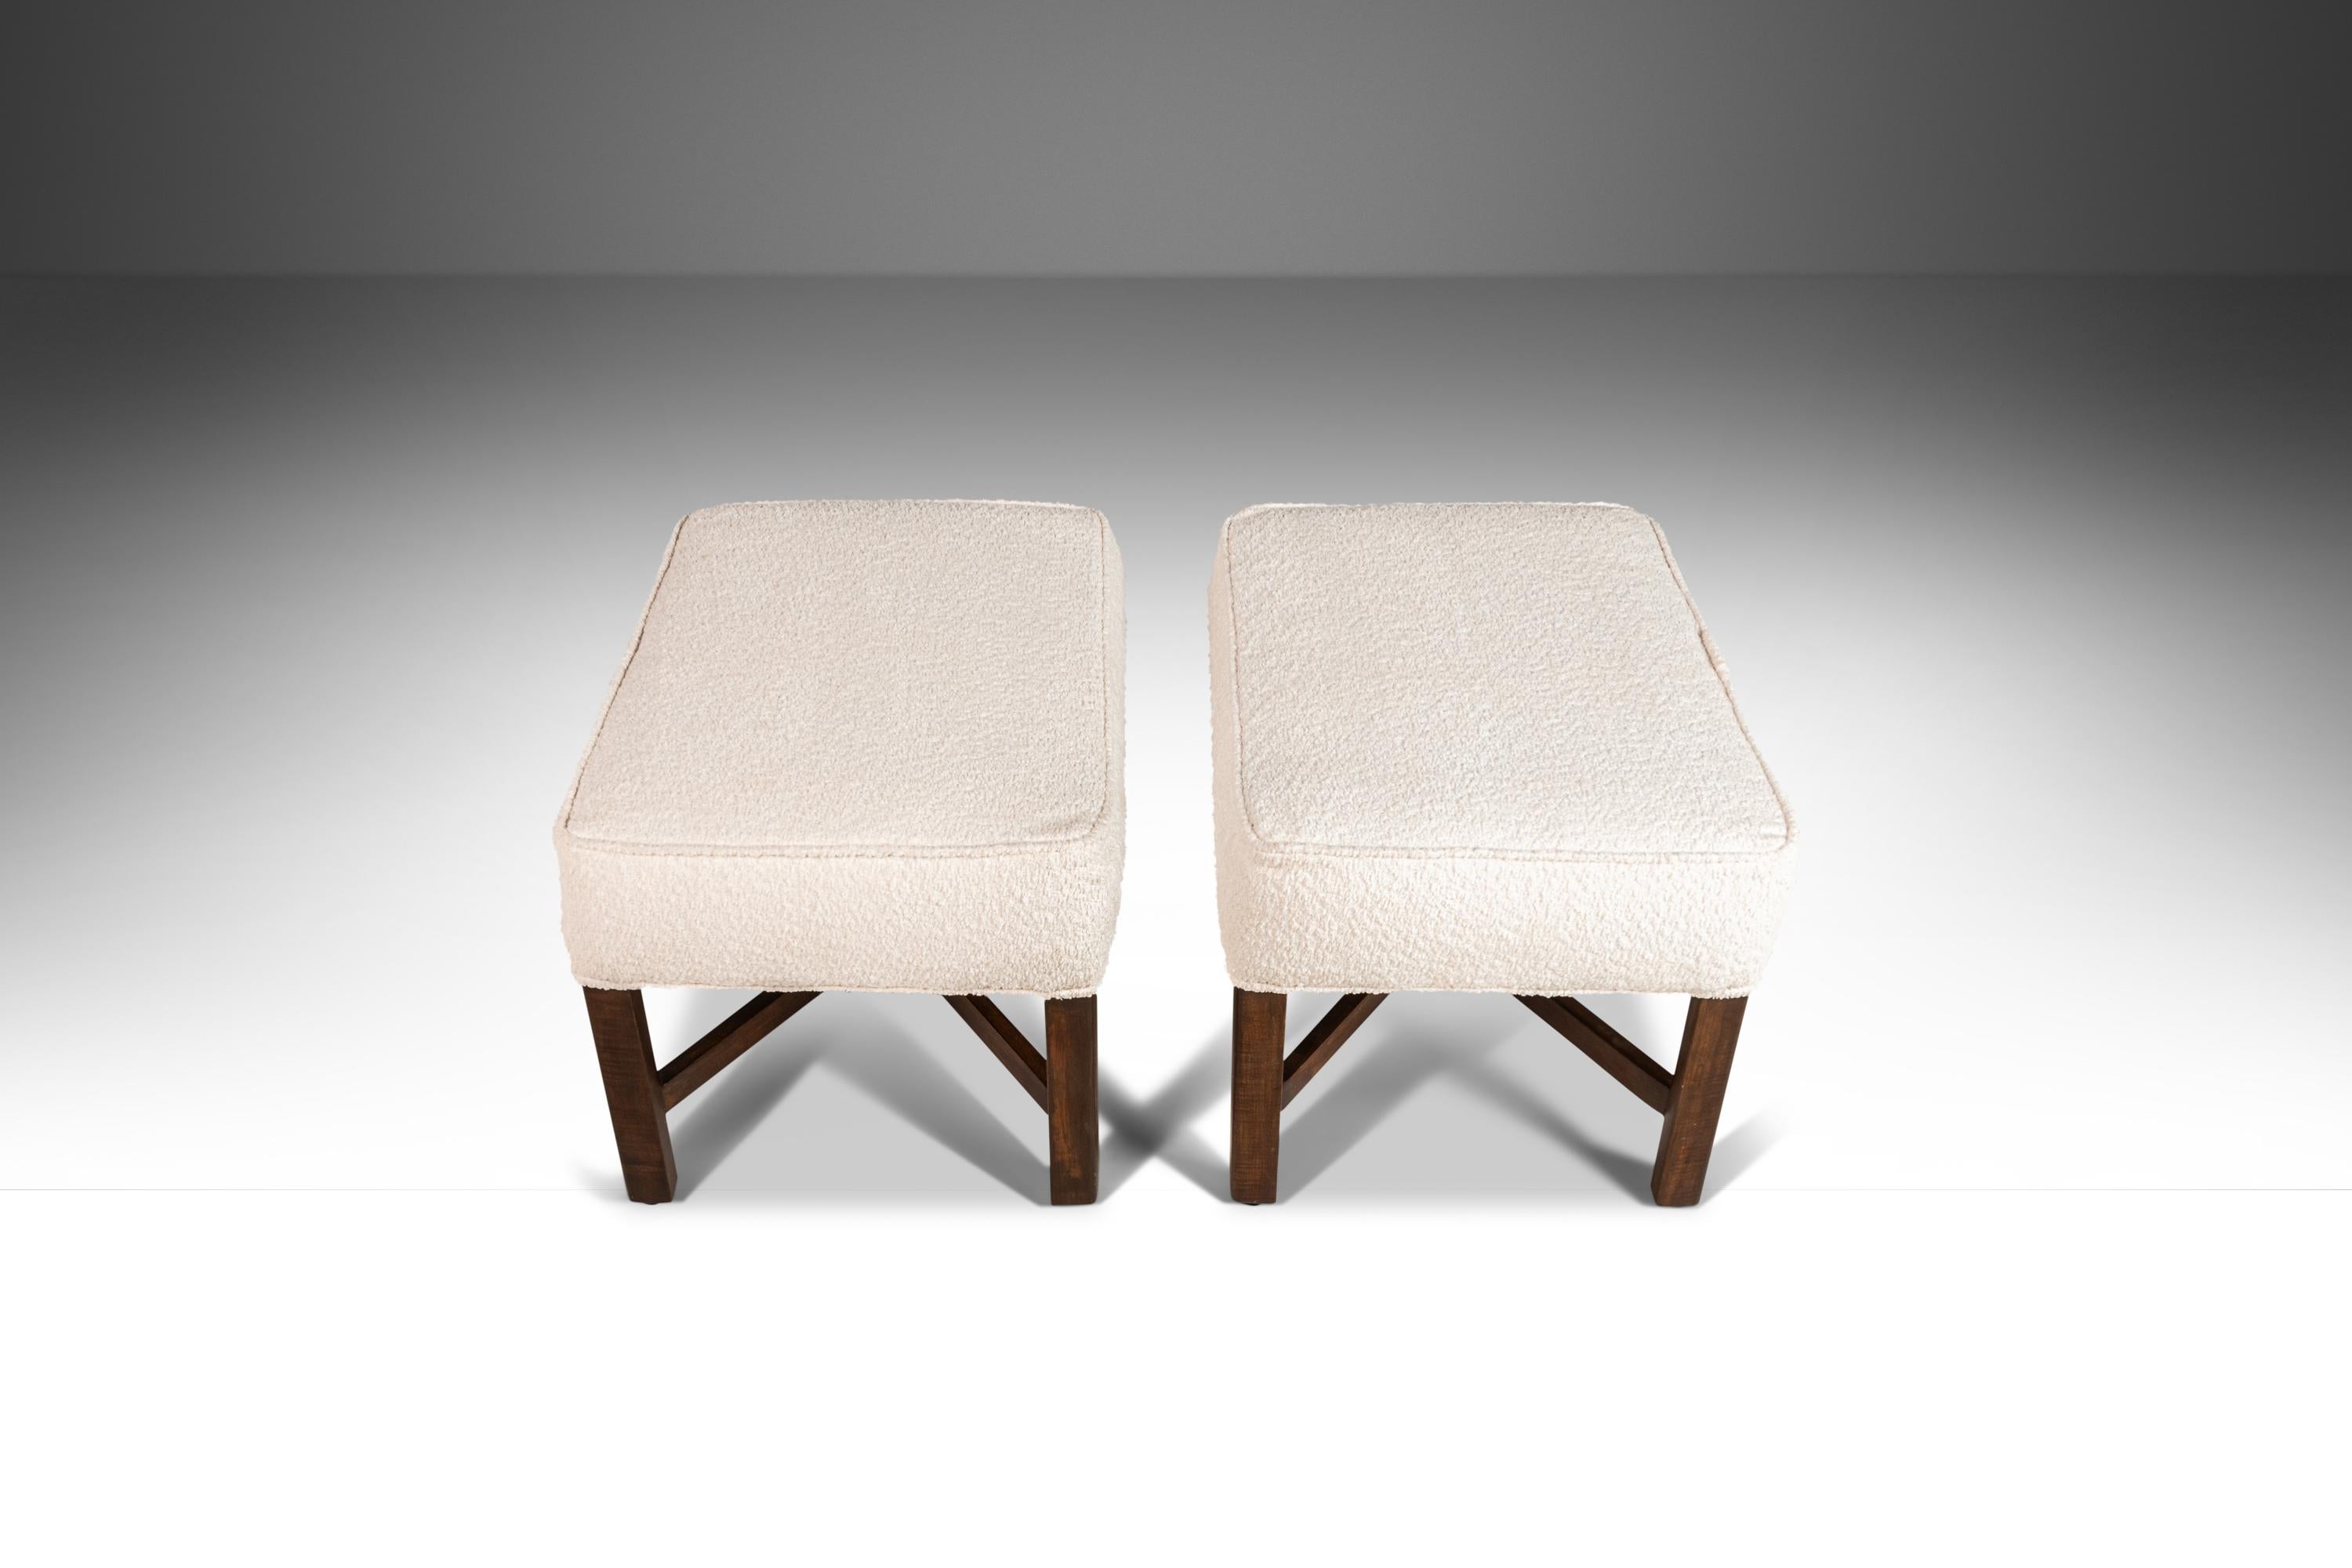 American Set of Two '2' Ottomans Footstools After Edward Wormley for Dunbar, USA, 1960s For Sale